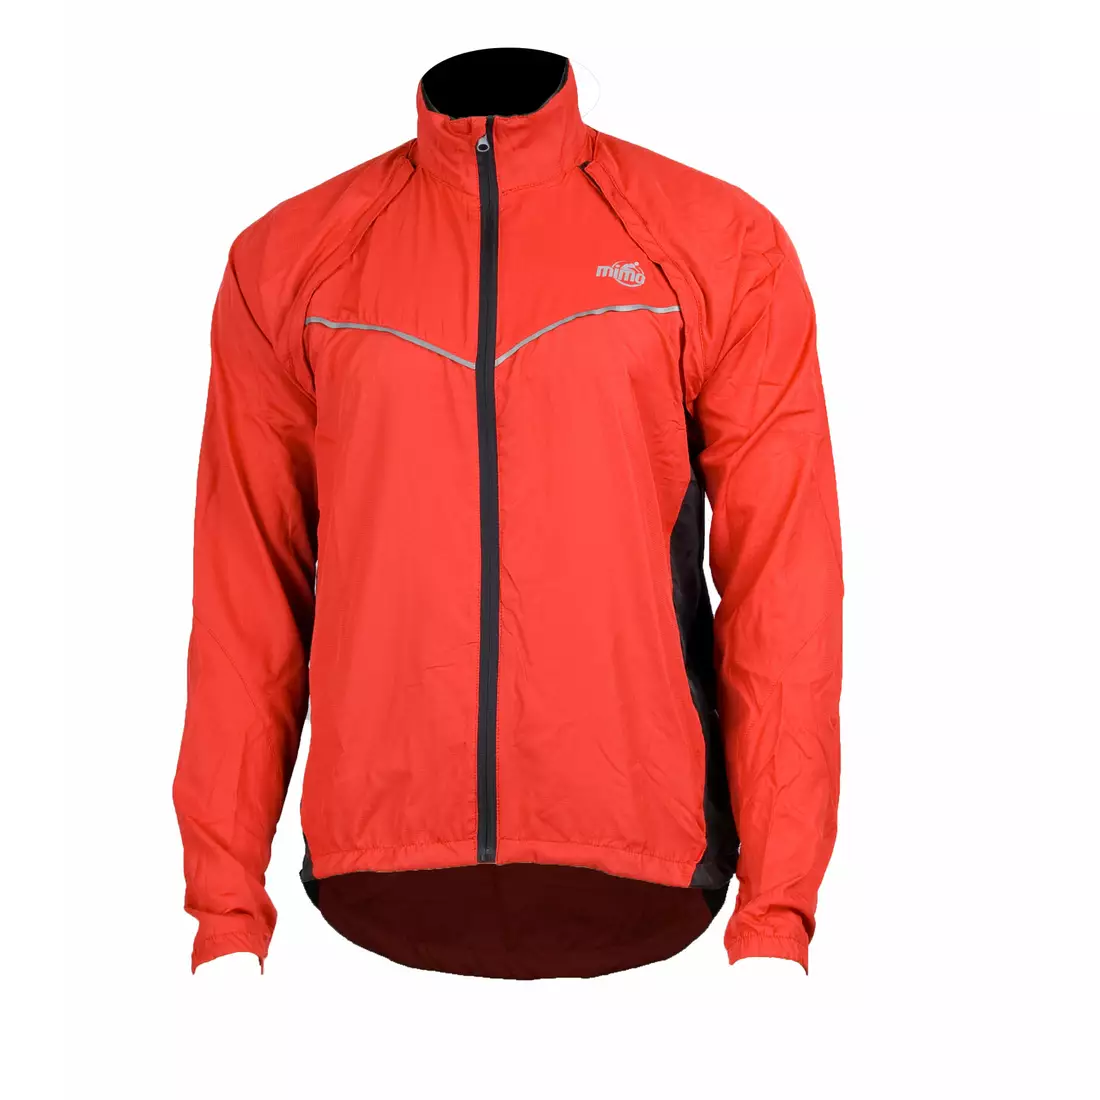 MikeSPORT SWORD - cycling jacket, detachable sleeves, red